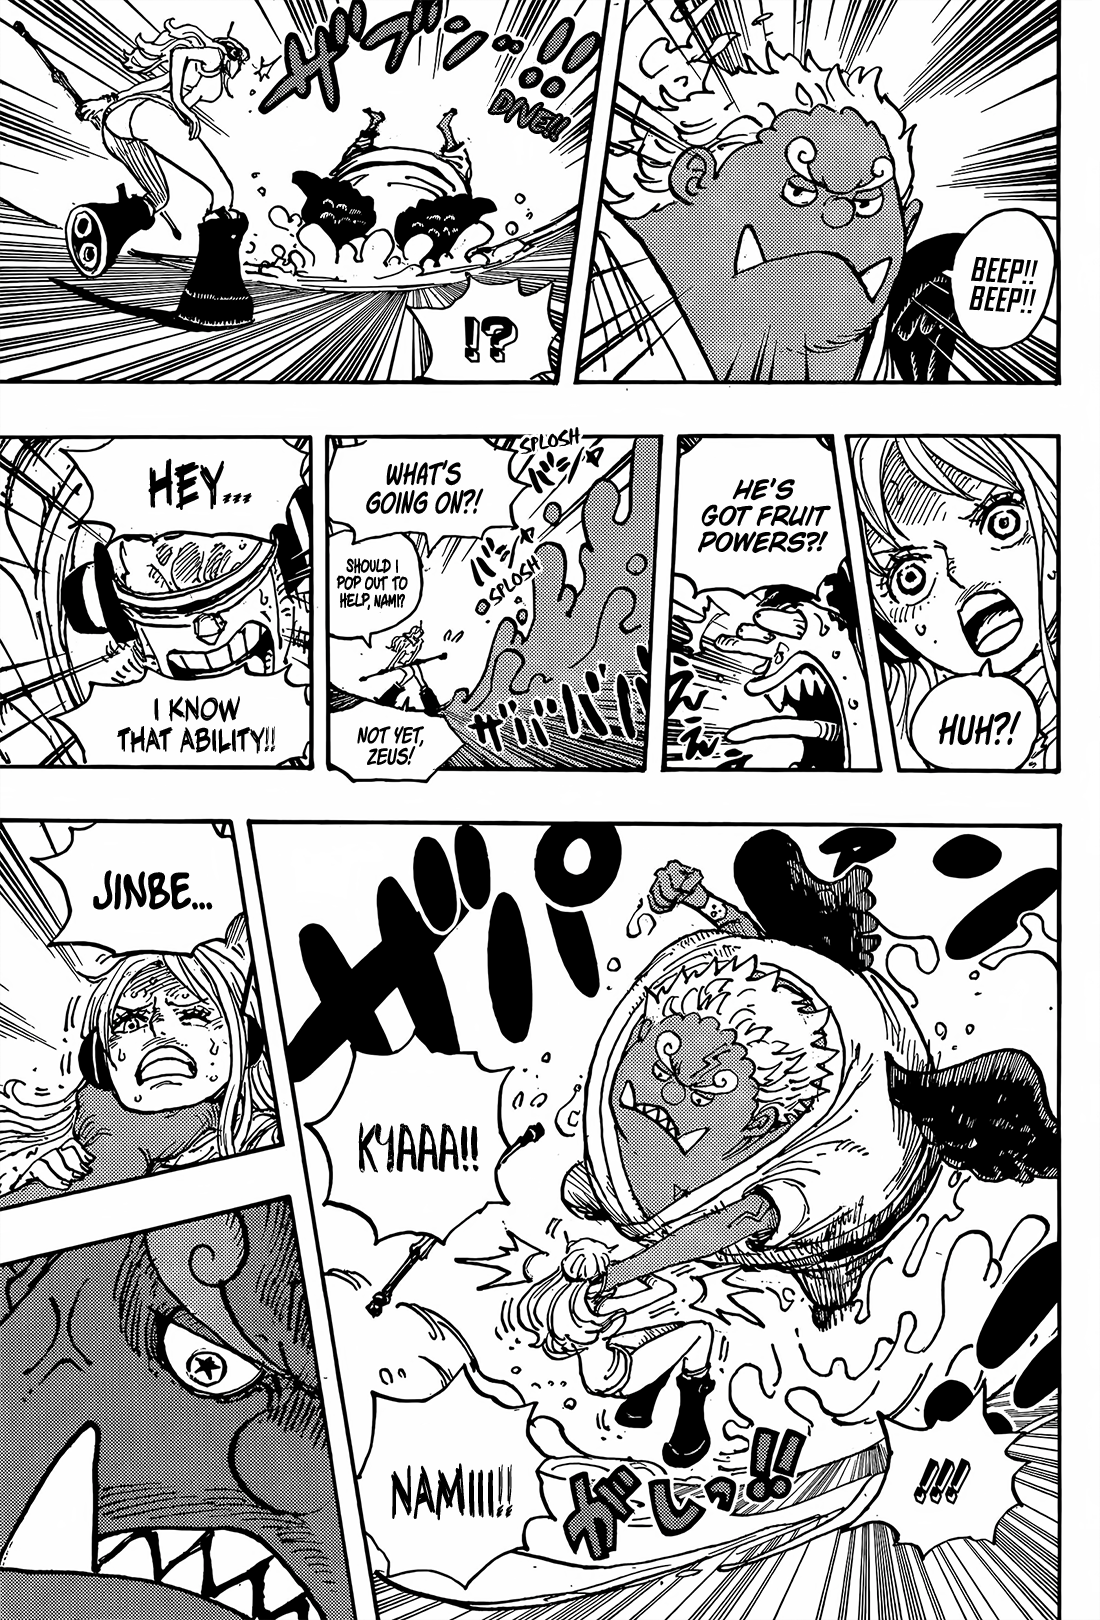 One Piece Chapter 1065 One Piece, Chapter 1065 | TcbScans Org - Free Manga Online in High Quality